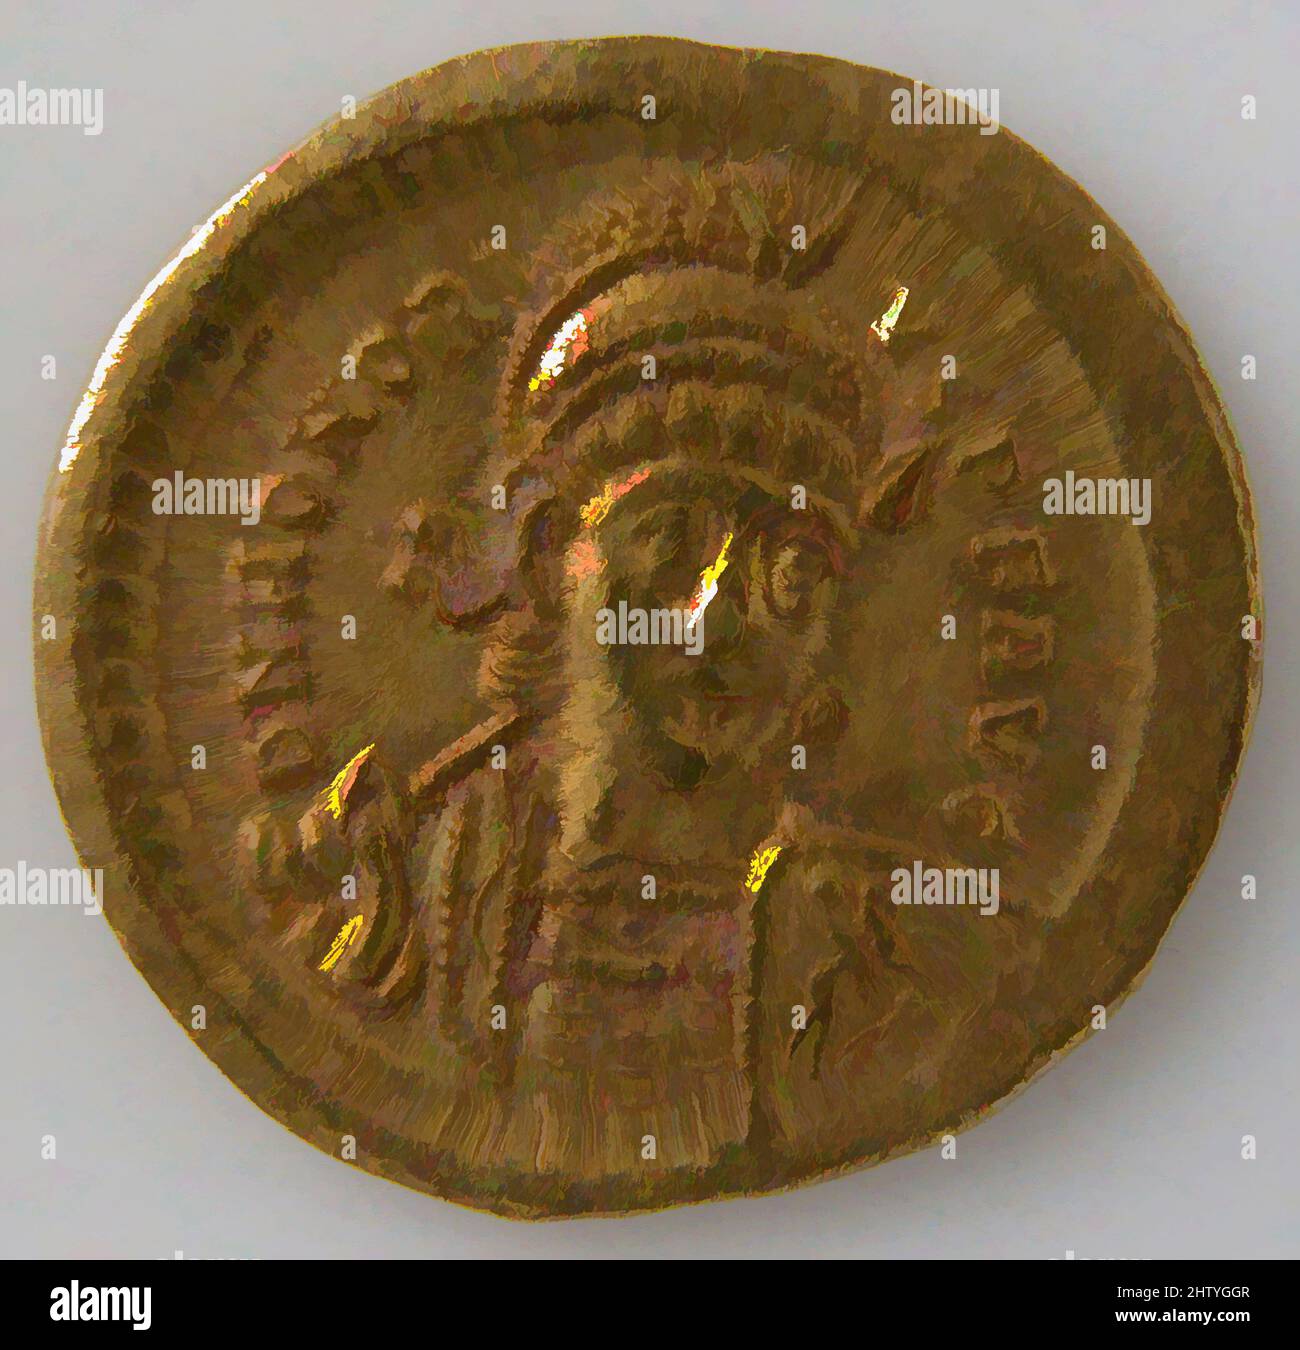 Art inspired by Solidus, 395–423, Byzantine, Gold, Overall: 13/16 x 1/16 in. (2 x 0.1 cm), Coins, Classic works modernized by Artotop with a splash of modernity. Shapes, color and value, eye-catching visual impact on art. Emotions through freedom of artworks in a contemporary way. A timeless message pursuing a wildly creative new direction. Artists turning to the digital medium and creating the Artotop NFT Stock Photo